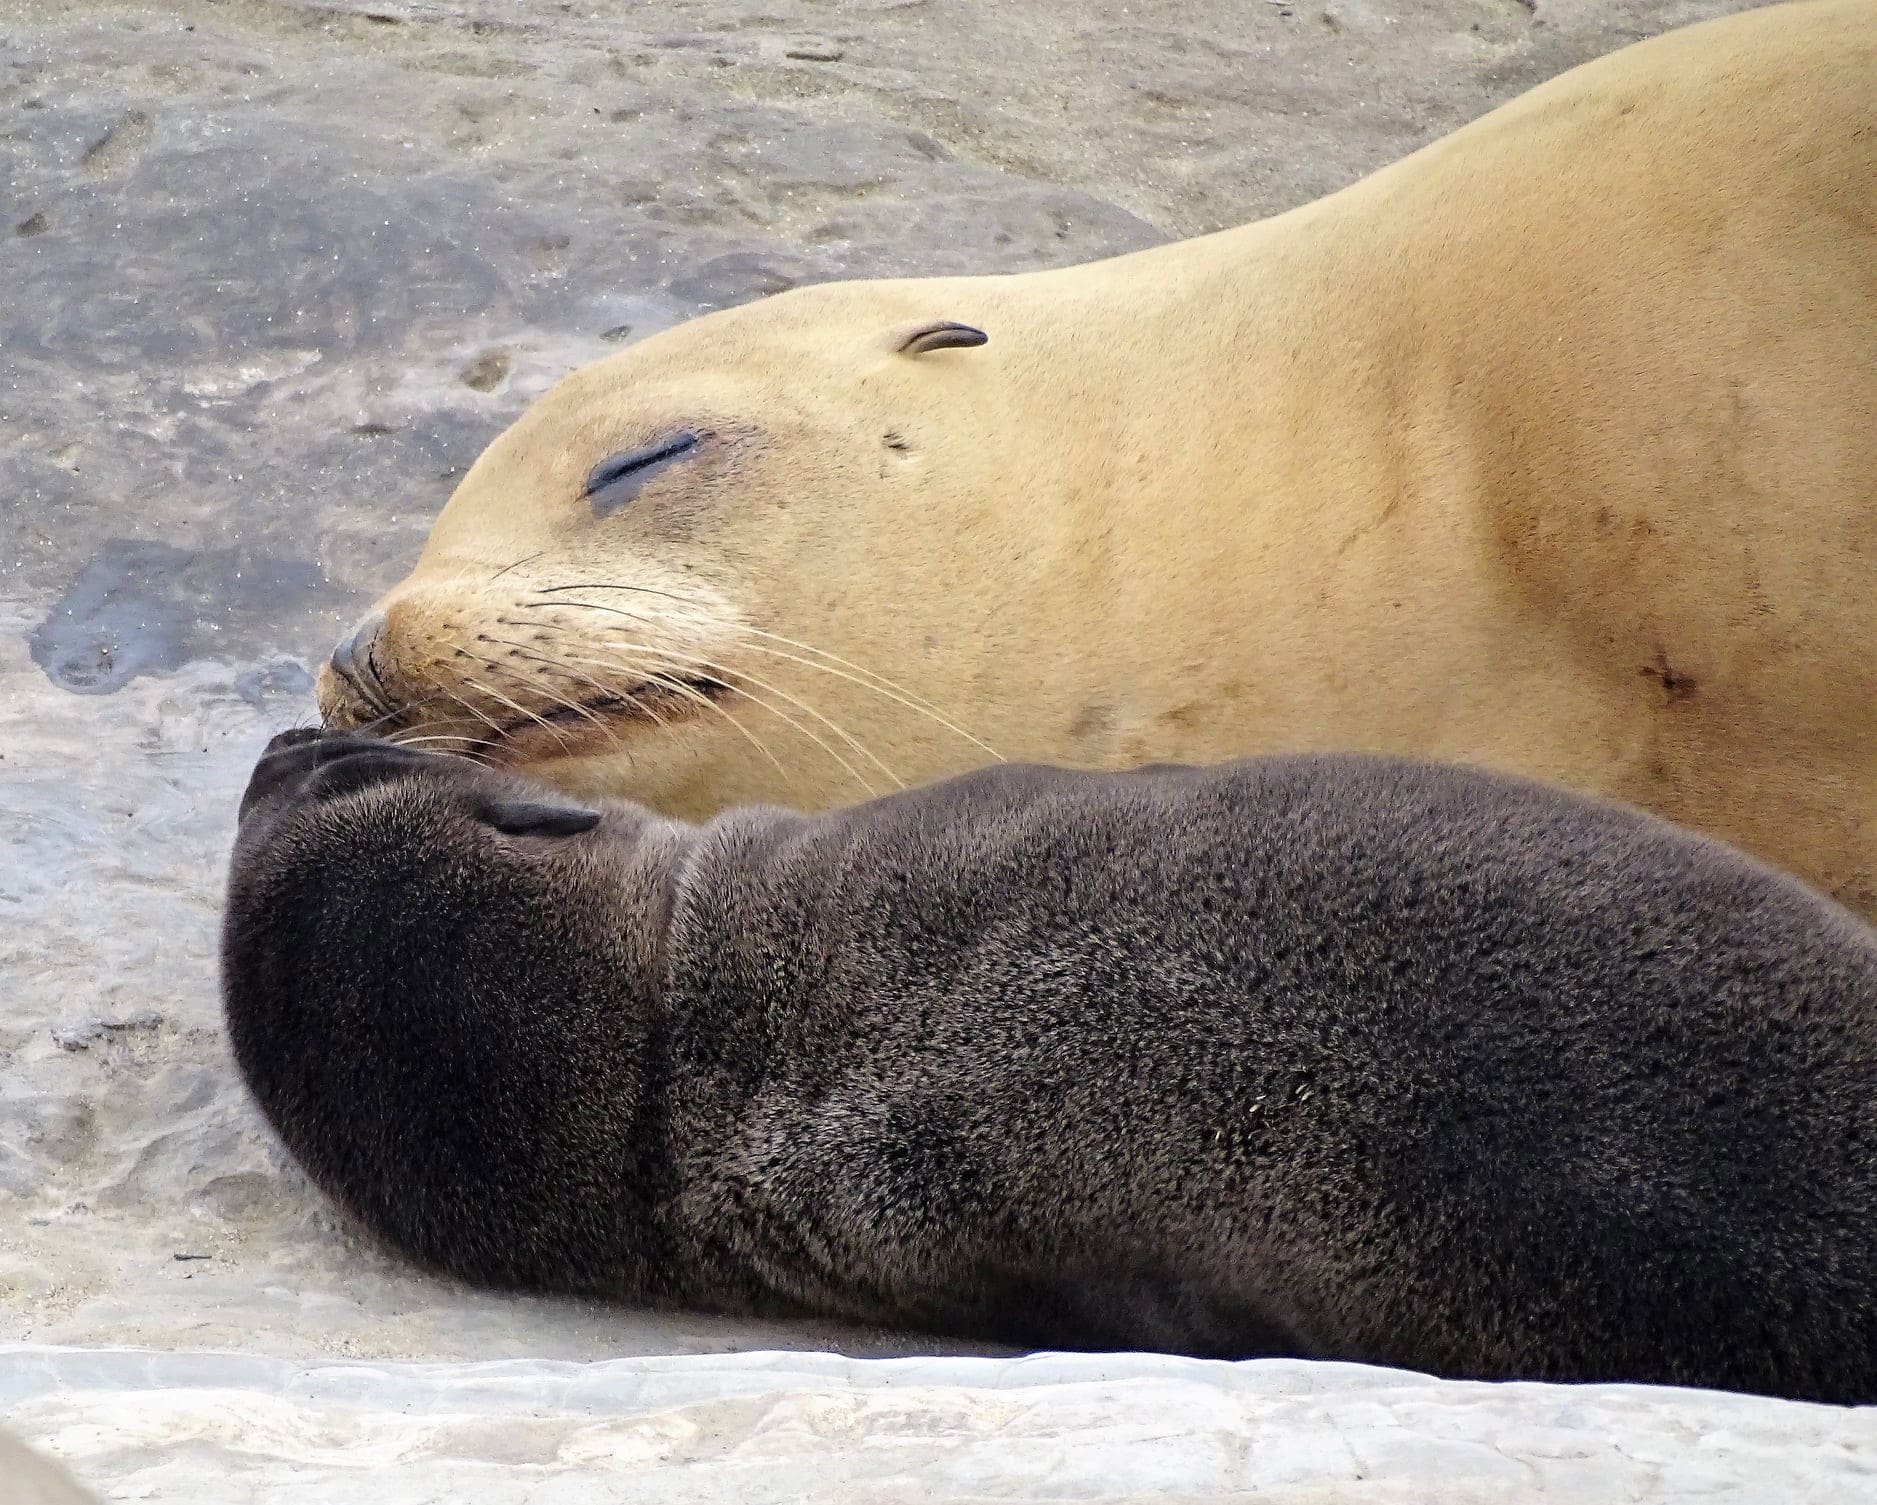 San Diego shuts popular beaches to protect sea lions